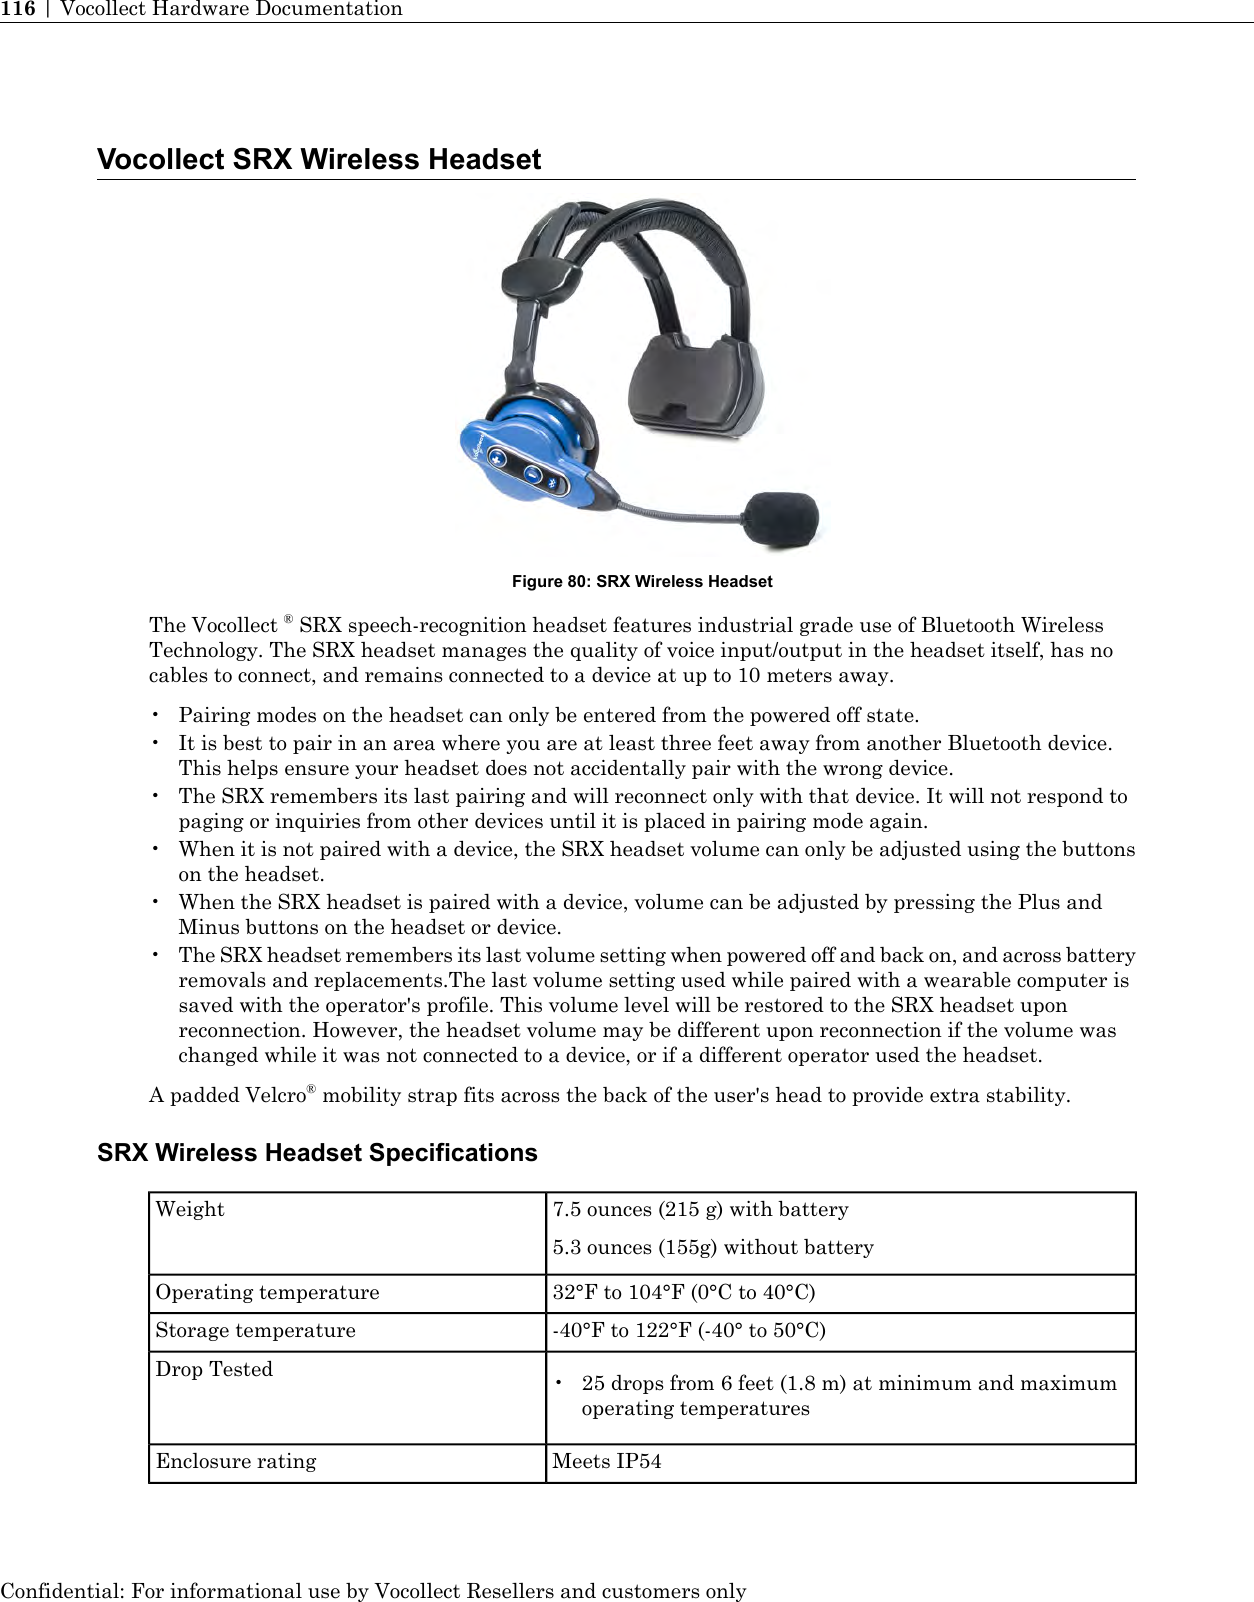 Vocollect SRX Wireless HeadsetFigure 80: SRX Wireless HeadsetThe Vocollect ®SRX speech-recognition headset features industrial grade use of Bluetooth WirelessTechnology. The SRX headset manages the quality of voice input/output in the headset itself, has nocables to connect, and remains connected to a device at up to 10 meters away.• Pairing modes on the headset can only be entered from the powered off state.• It is best to pair in an area where you are at least three feet away from another Bluetooth device.This helps ensure your headset does not accidentally pair with the wrong device.• The SRX remembers its last pairing and will reconnect only with that device. It will not respond topaging or inquiries from other devices until it is placed in pairing mode again.• When it is not paired with a device, the SRX headset volume can only be adjusted using the buttonson the headset.• When the SRX headset is paired with a device, volume can be adjusted by pressing the Plus andMinus buttons on the headset or device.•The SRX headset remembers its last volume setting when powered off and back on, and across batteryremovals and replacements.The last volume setting used while paired with a wearable computer issaved with the operator&apos;s profile. This volume level will be restored to the SRX headset uponreconnection. However, the headset volume may be different upon reconnection if the volume waschanged while it was not connected to a device, or if a different operator used the headset.A padded Velcro®mobility strap fits across the back of the user&apos;s head to provide extra stability.SRX Wireless Headset Specifications7.5 ounces (215 g) with battery5.3 ounces (155g) without batteryWeight32°F to 104°F (0°C to 40°C)Operating temperature-40°F to 122°F (-40° to 50°C)Storage temperatureDrop Tested • 25 drops from 6 feet (1.8 m) at minimum and maximumoperating temperaturesMeets IP54Enclosure ratingConfidential: For informational use by Vocollect Resellers and customers only116 | Vocollect Hardware Documentation